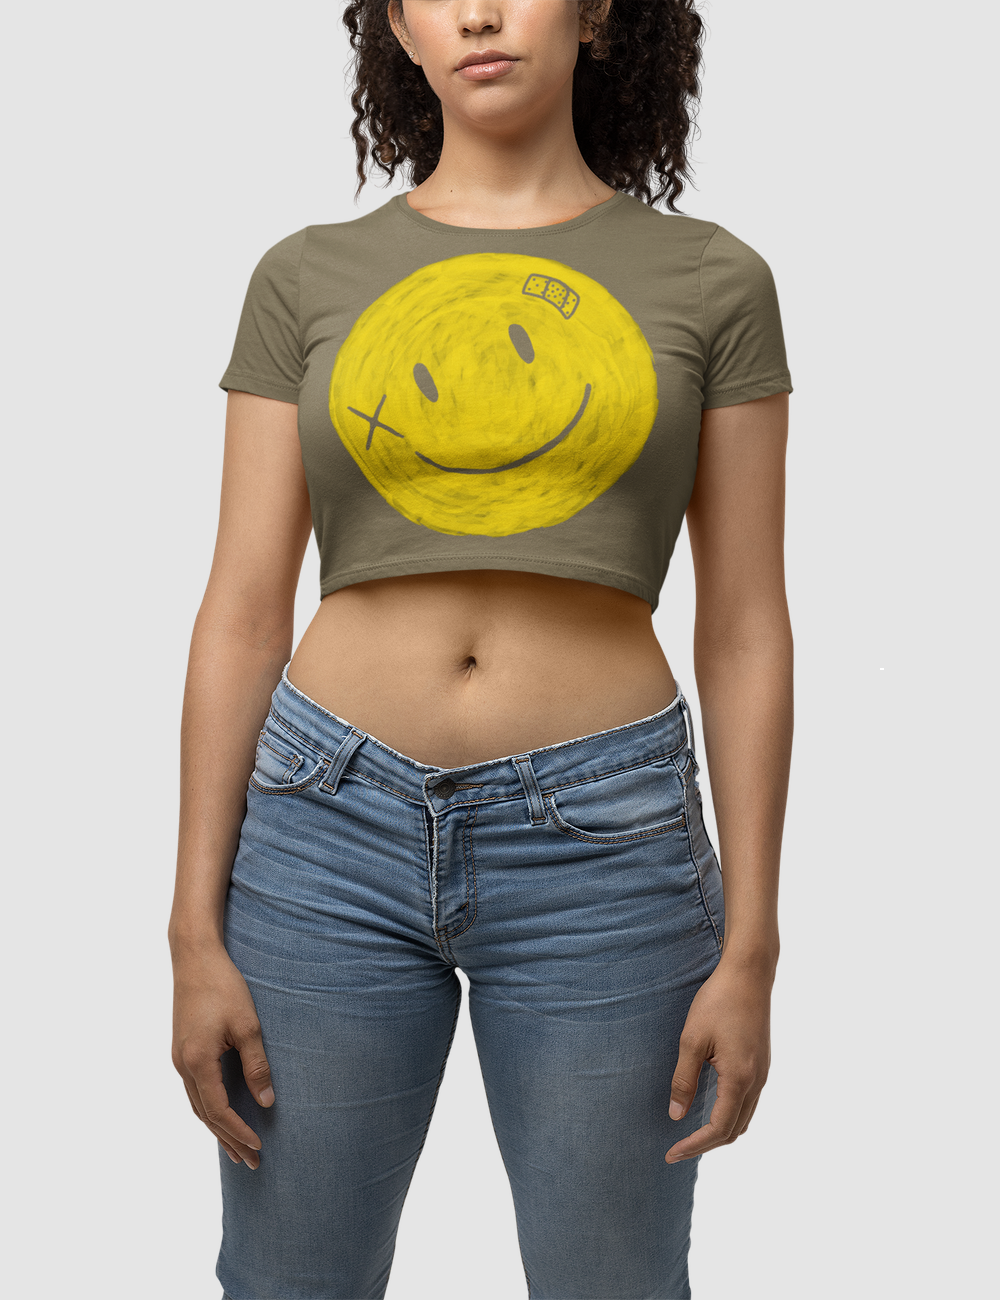 Battered Smiley Face Women's Fitted Crop Top T-Shirt OniTakai